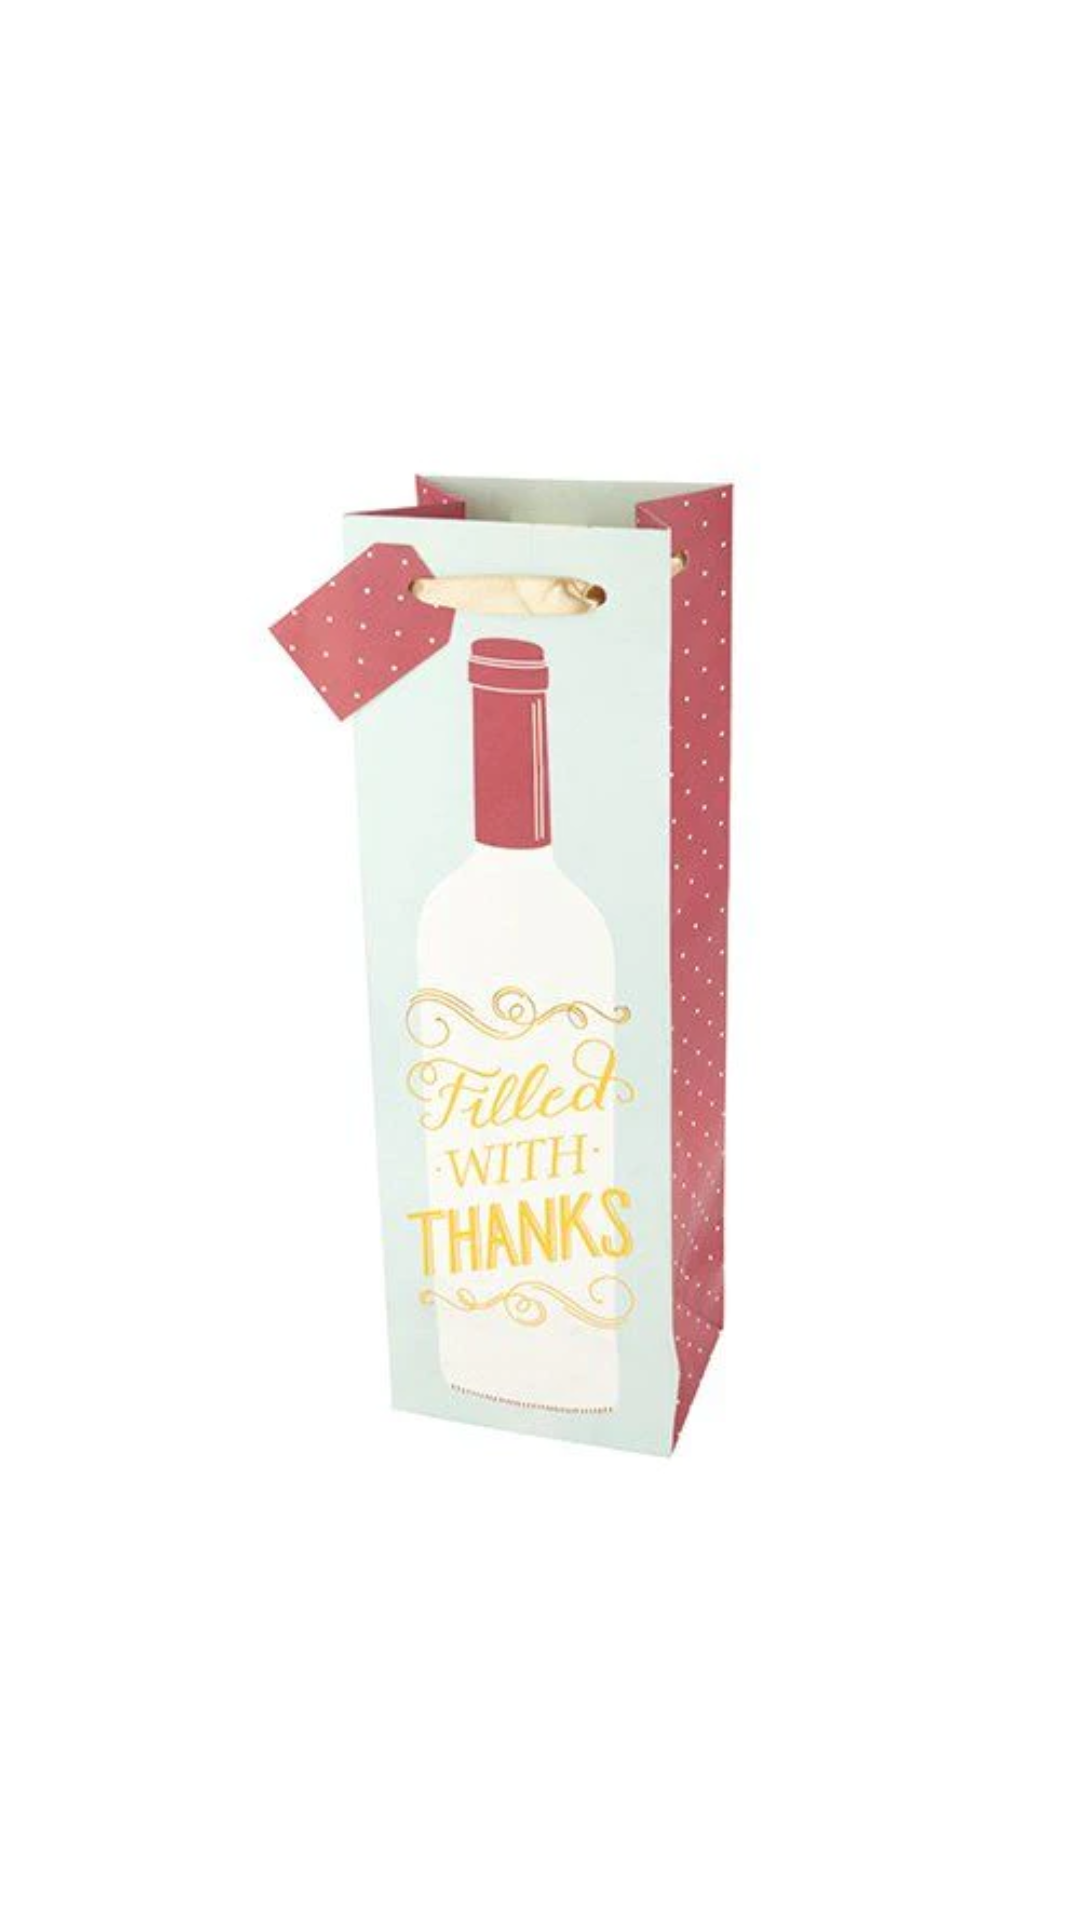 Filled with Thanks Wine Bag